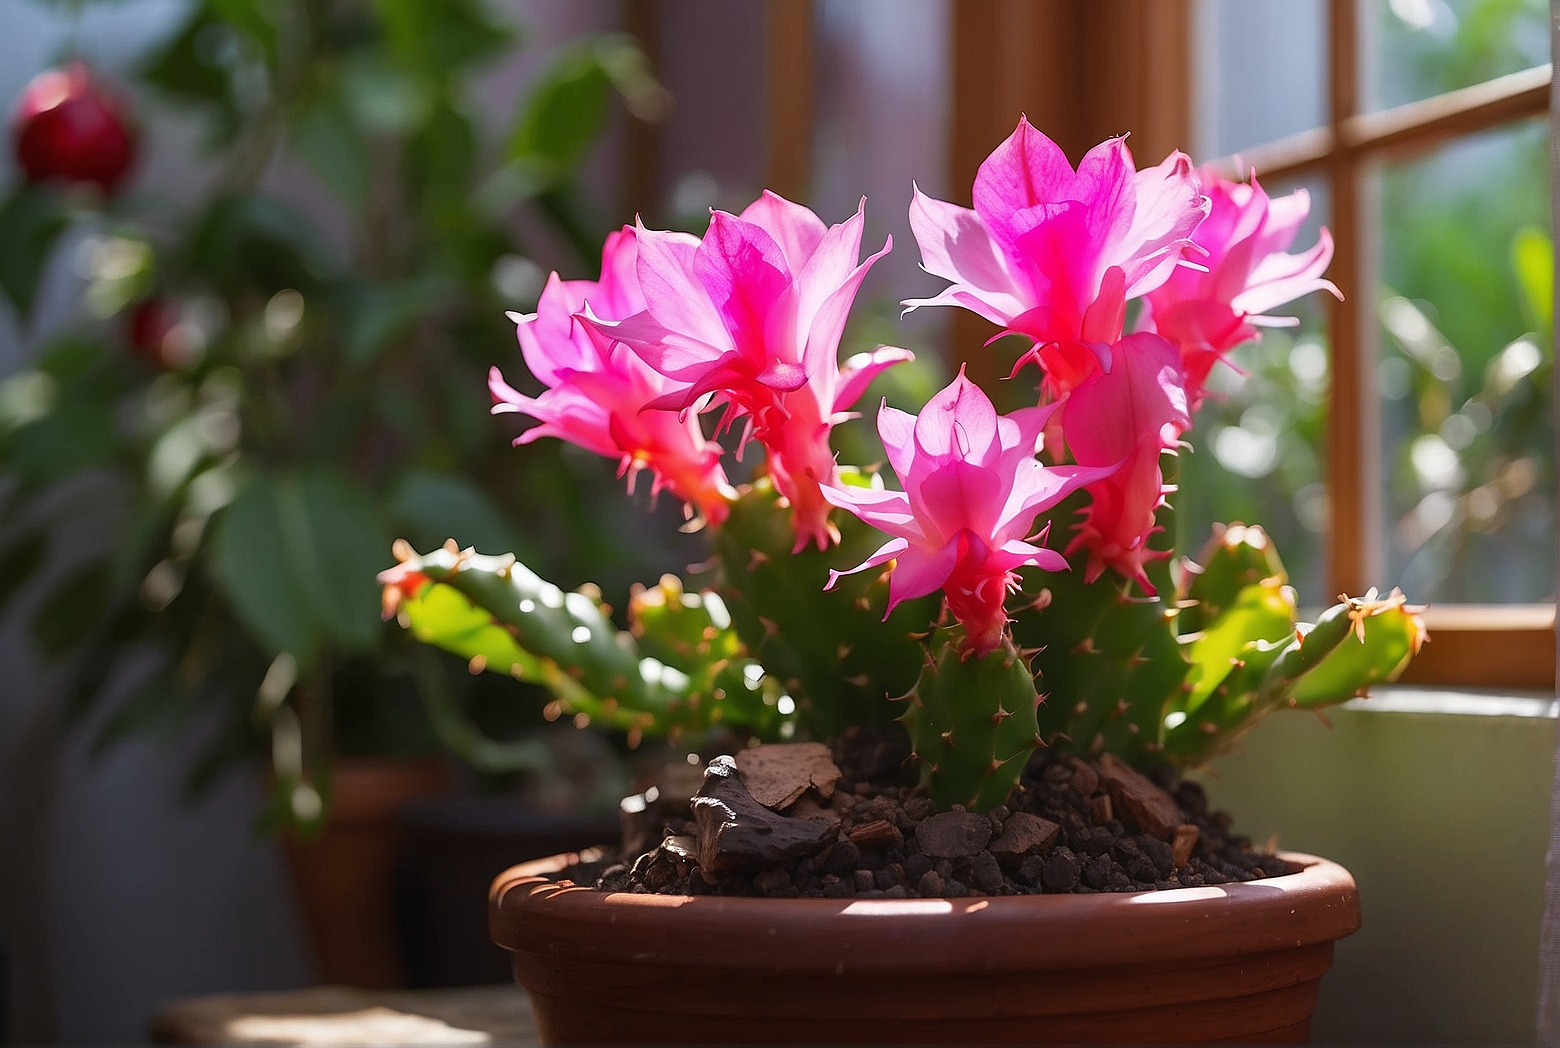 How to Measure the Sunlight Requirements of a Christmas Cactus